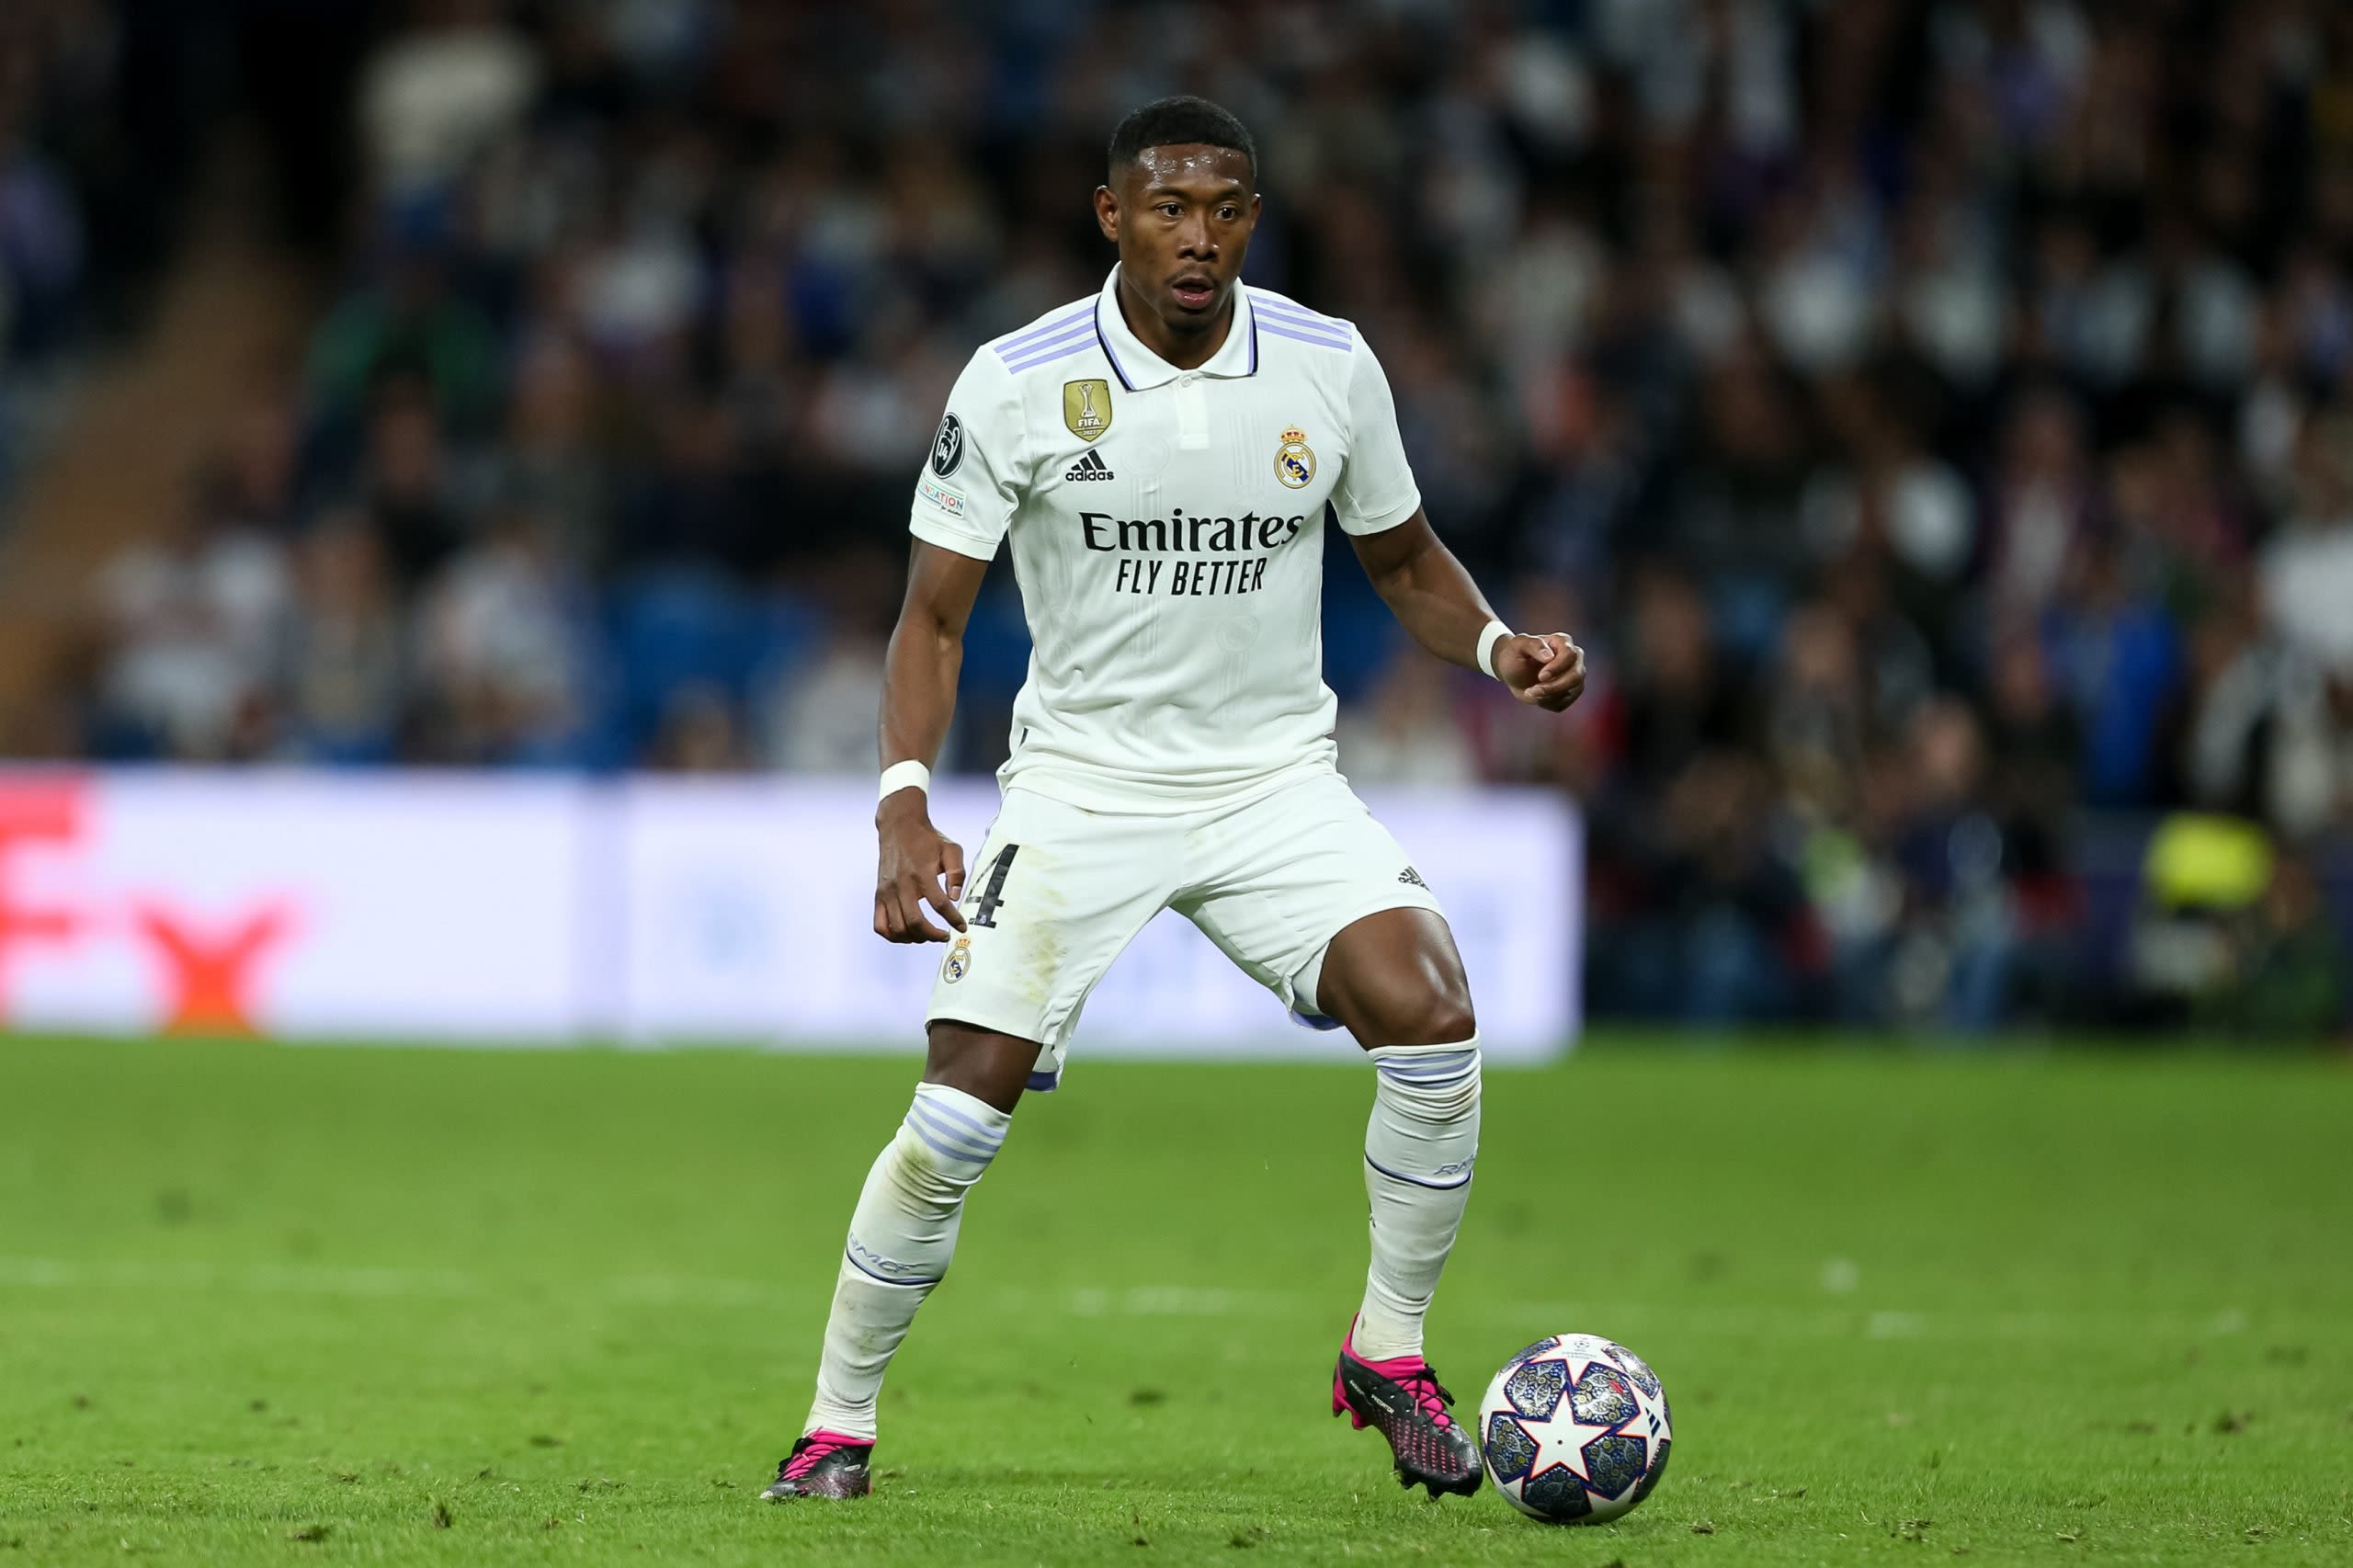 Real Madrid’s defender hunt hinges on star player’s recovery – report